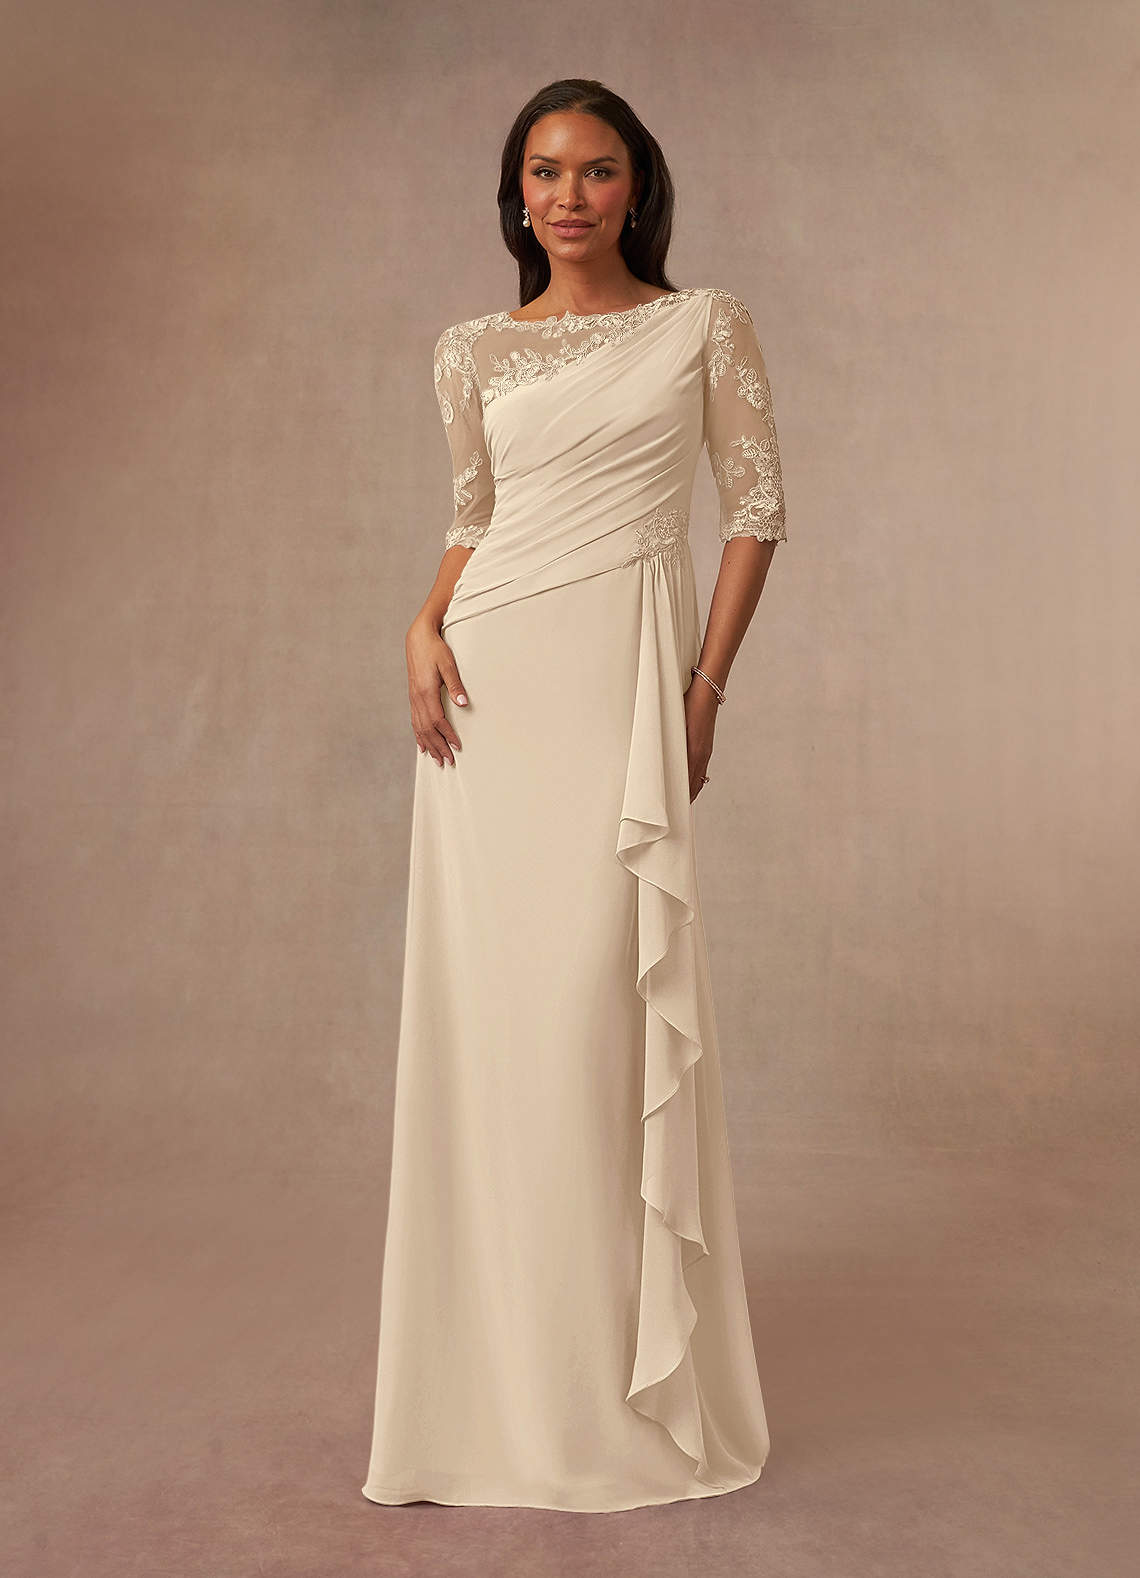 Azazie Dionysus Mother of the Bride Dresses A-Line Boatneck Lace Chiffon Floor-Length Dress image1